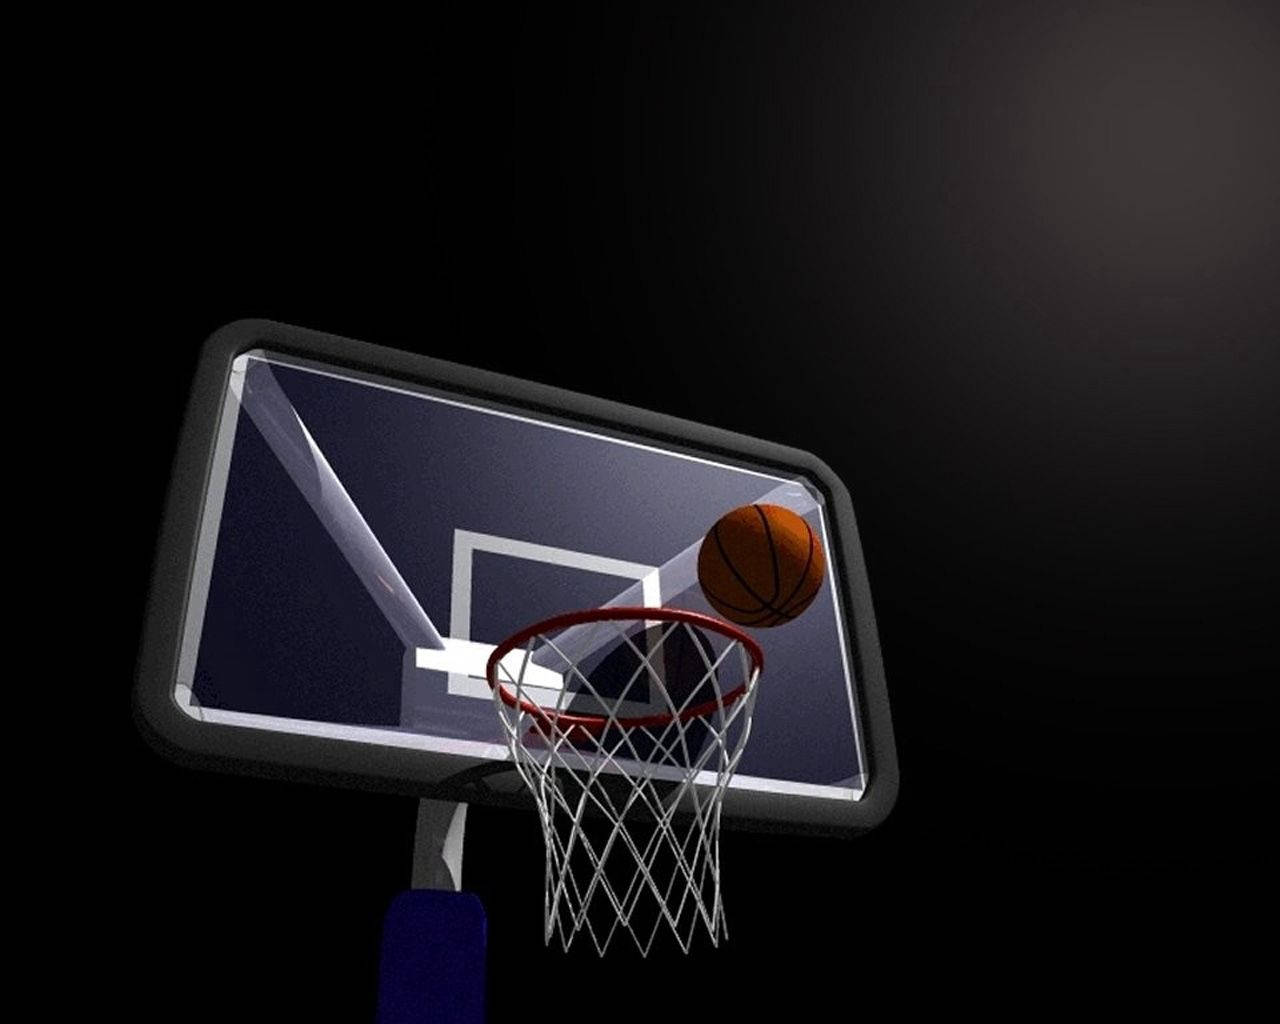 Ball On Basketball Board And Ring Background